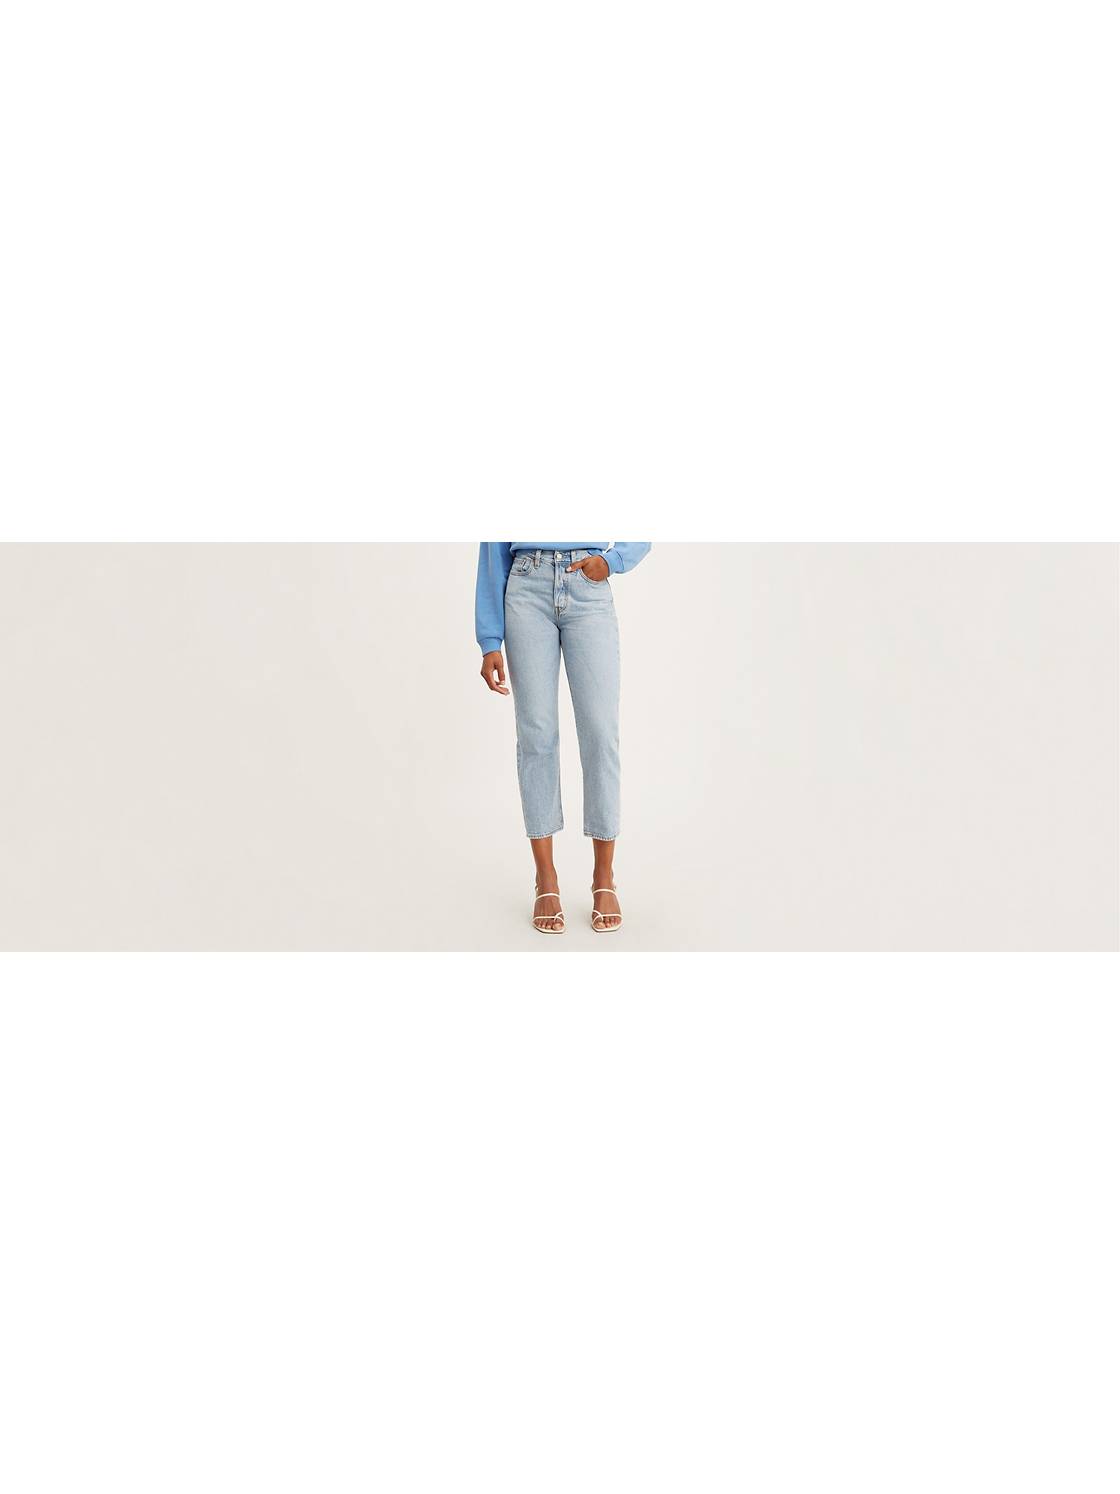 Wedgie Fit Straight Women's Jeans 1